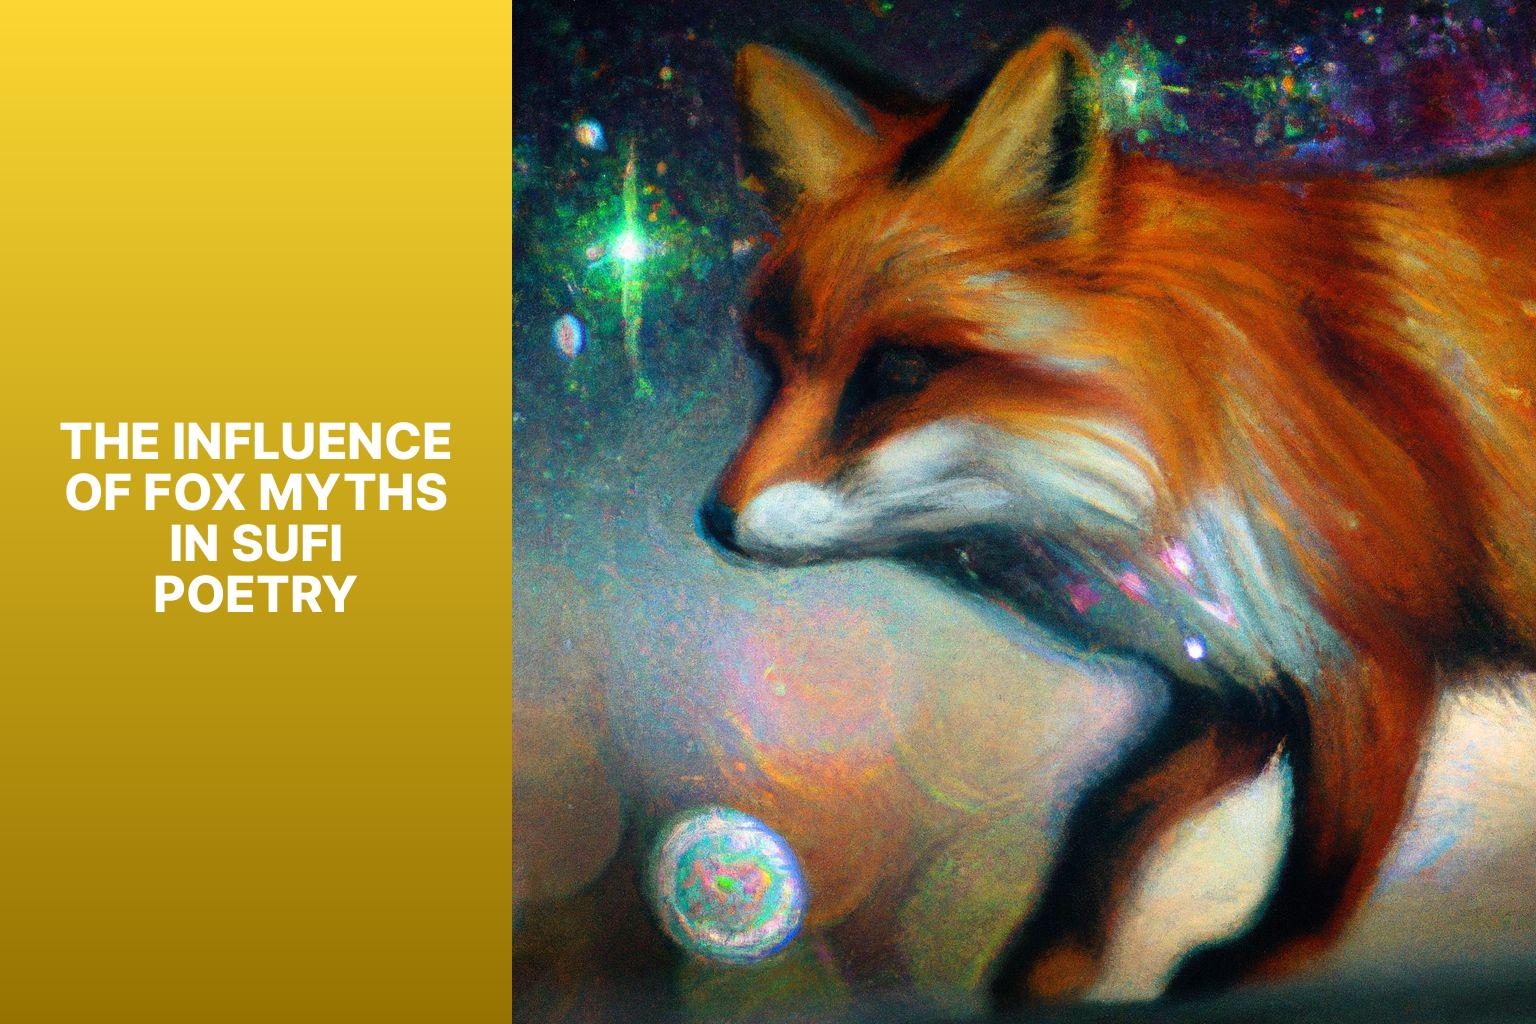 The Influence of Fox Myths in Sufi Poetry - Fox Myths in Sufism 